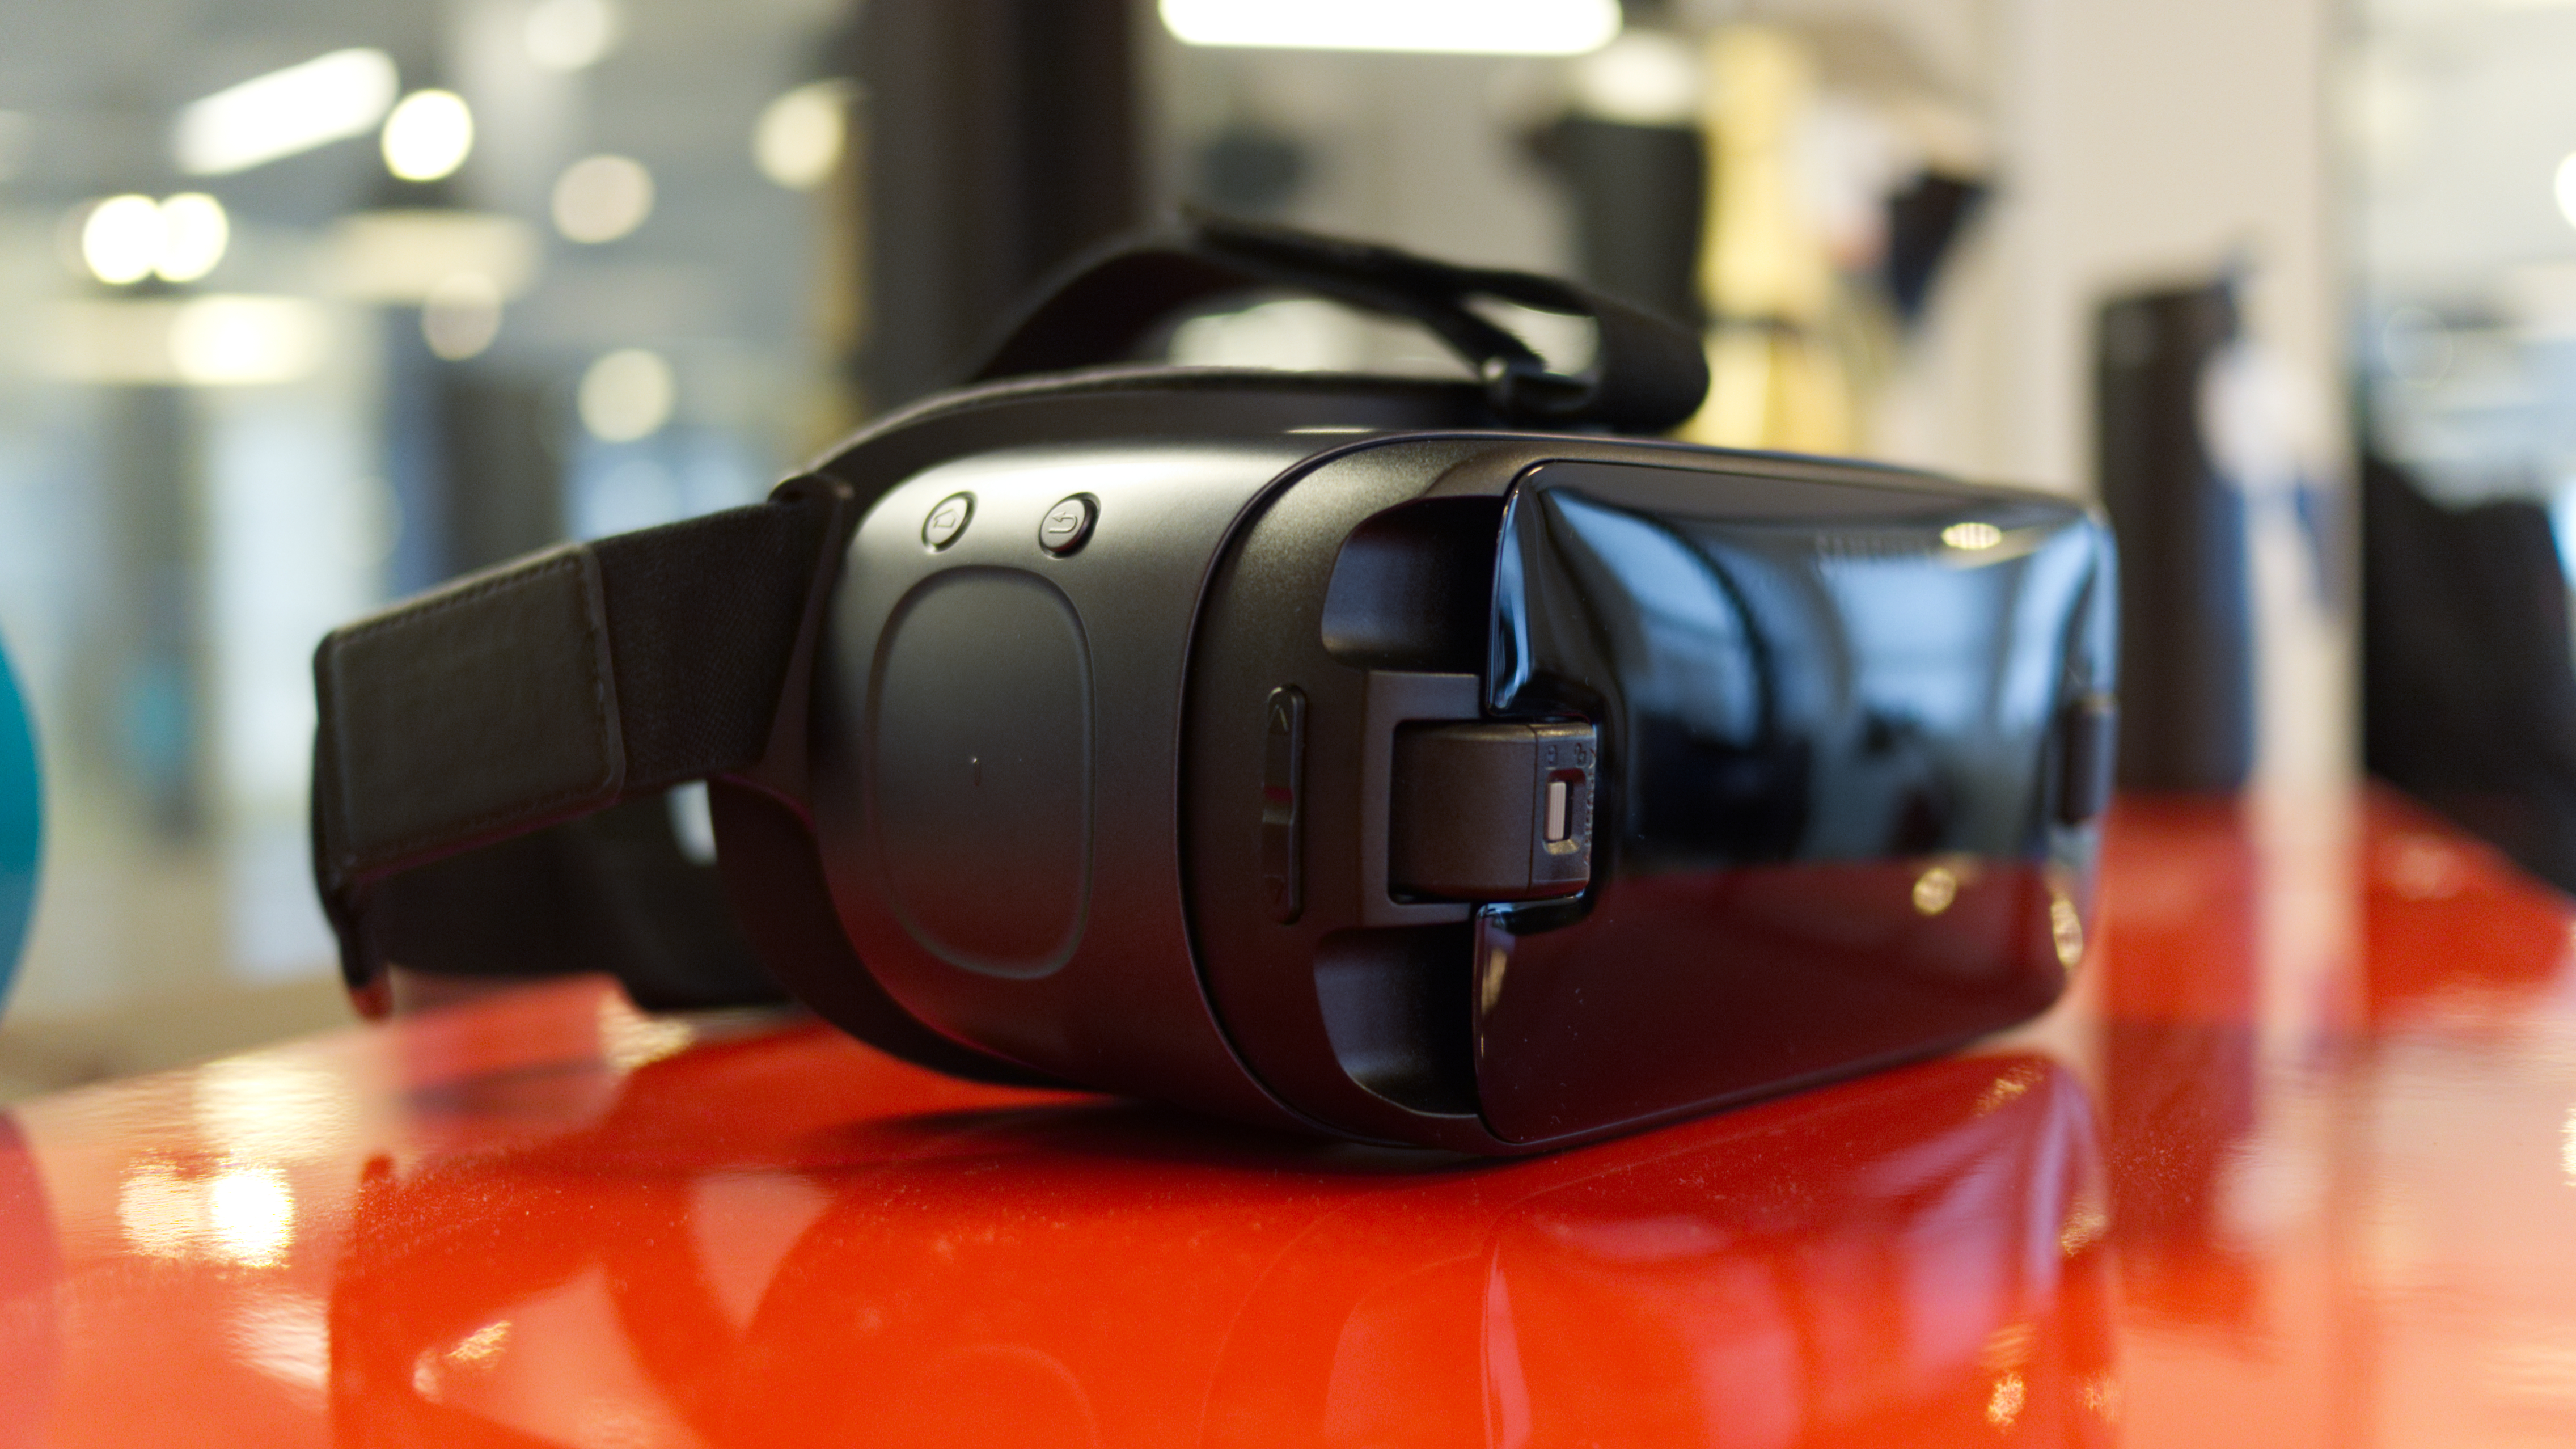 The Samsung Gear VR headset on a red desk